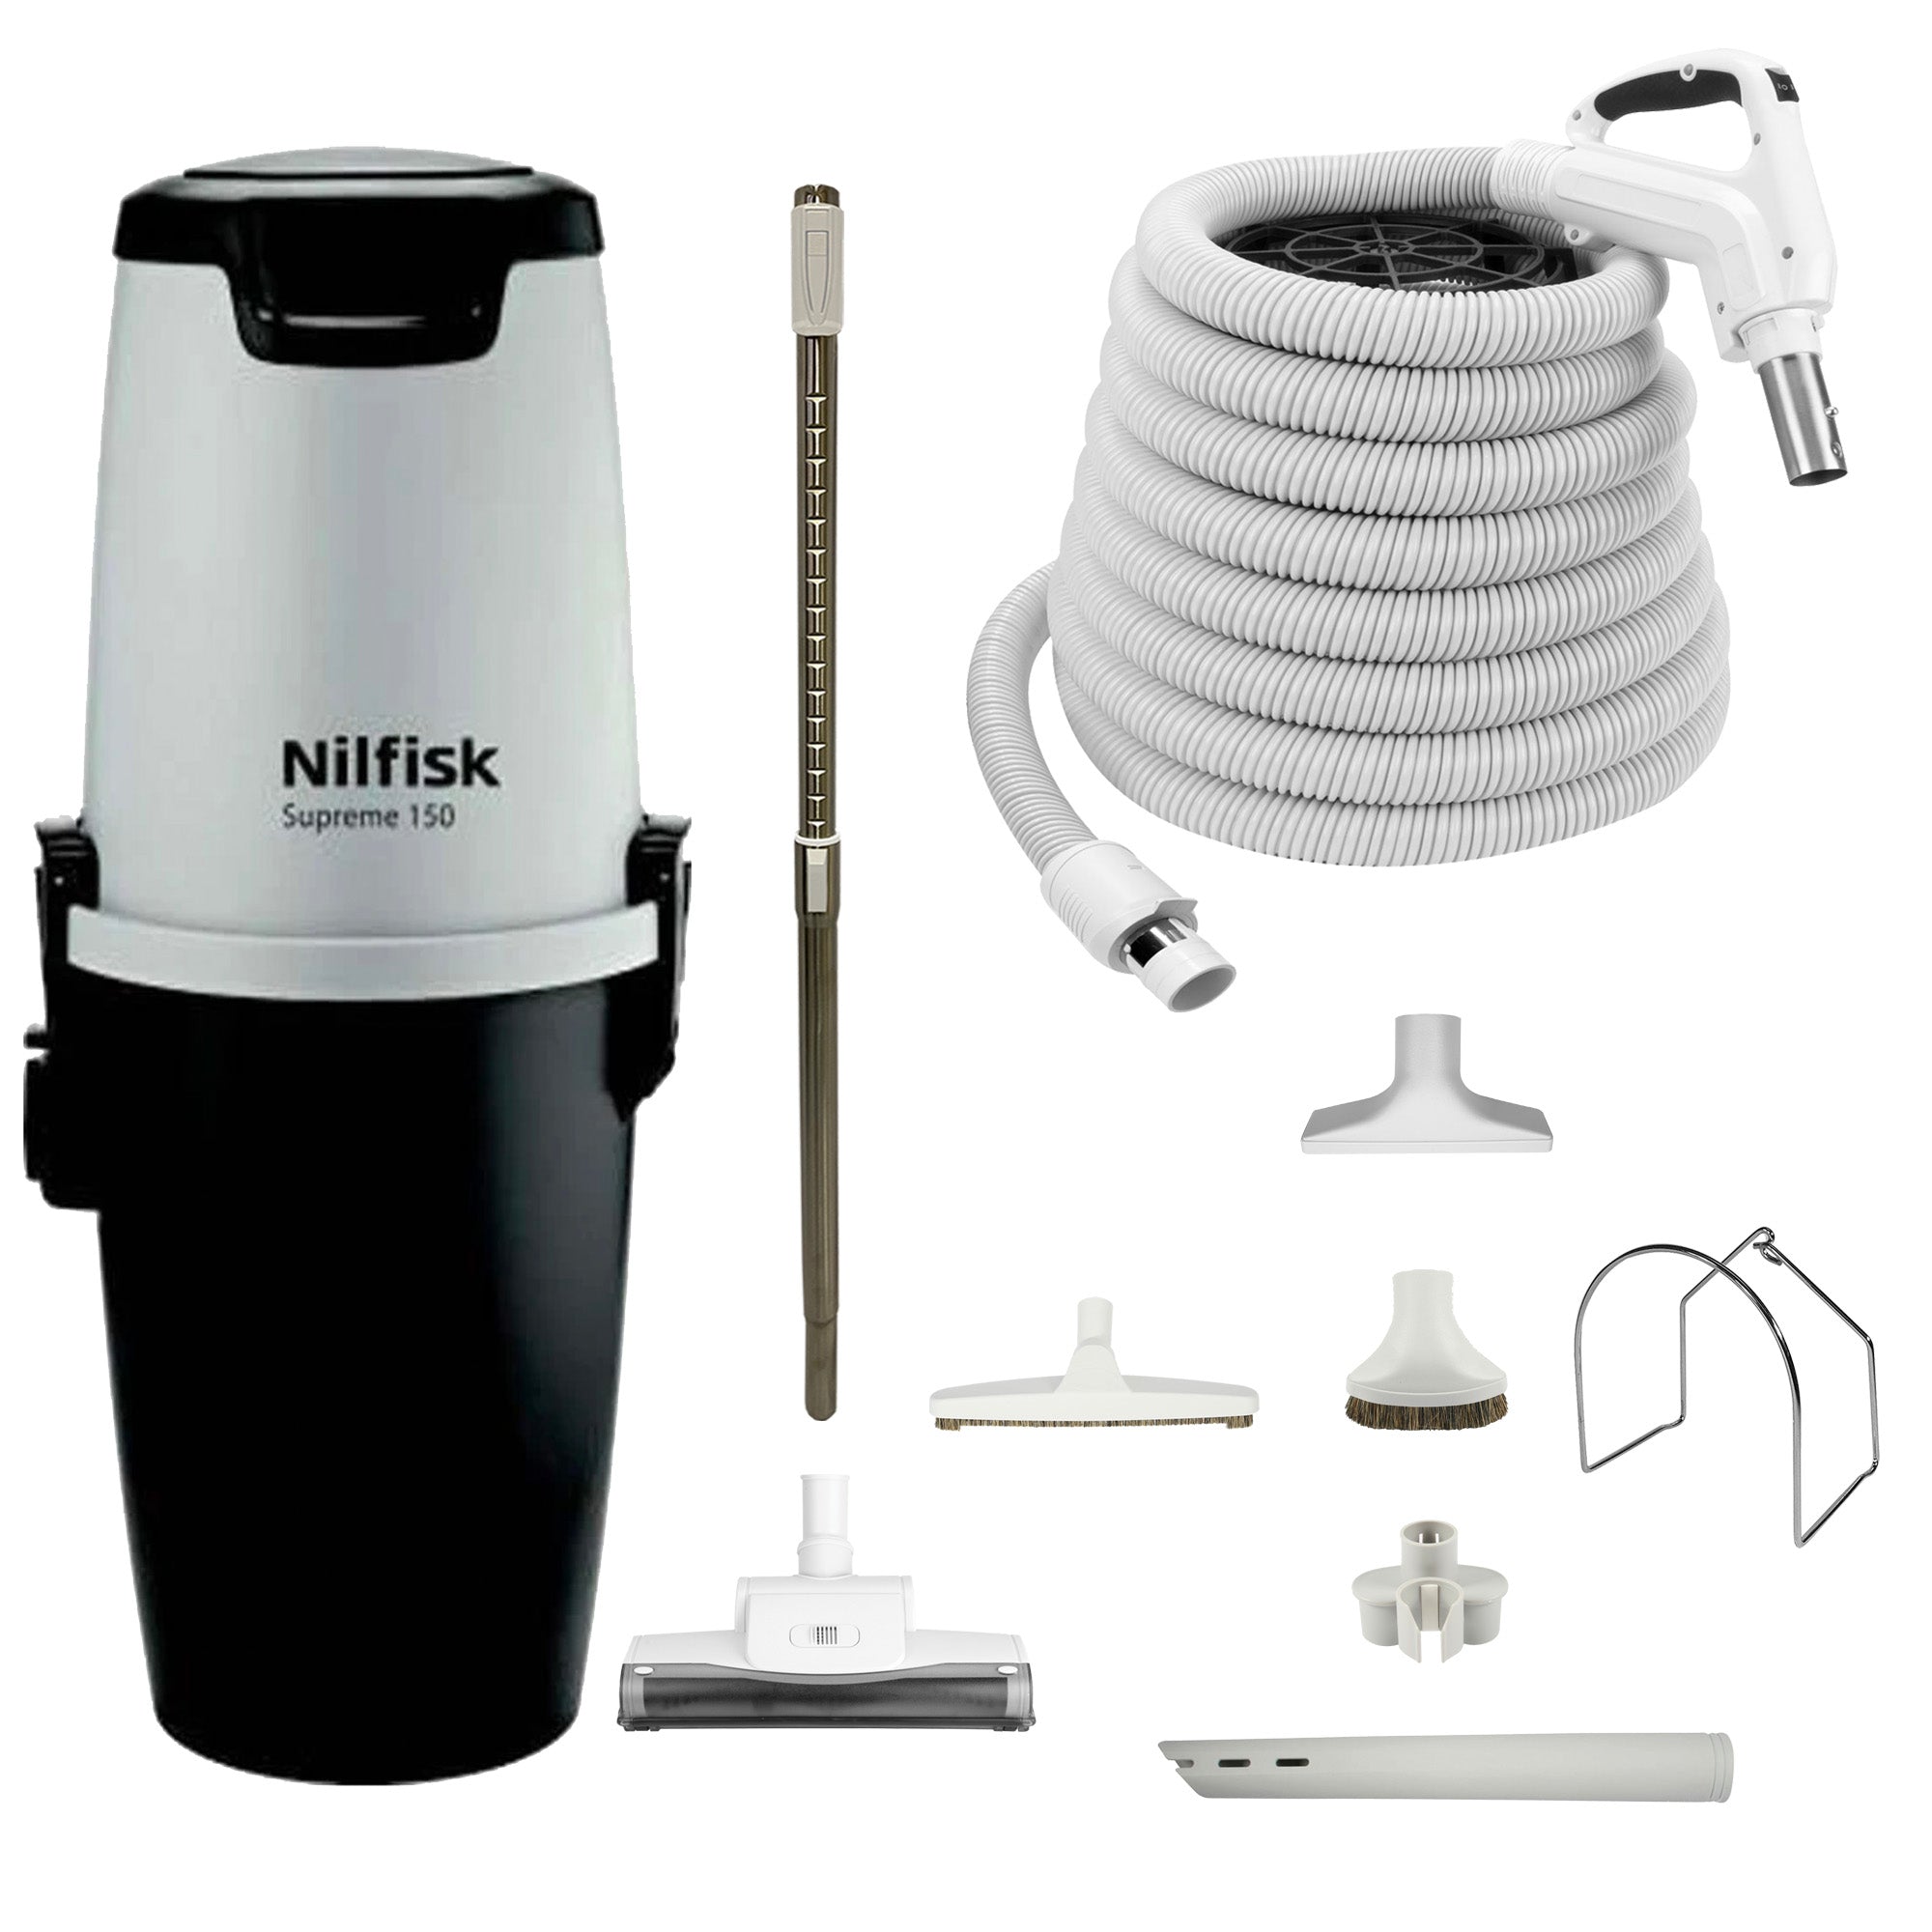 Nilfisk Supreme 150 Central Vacuum with Standard Air Package - White